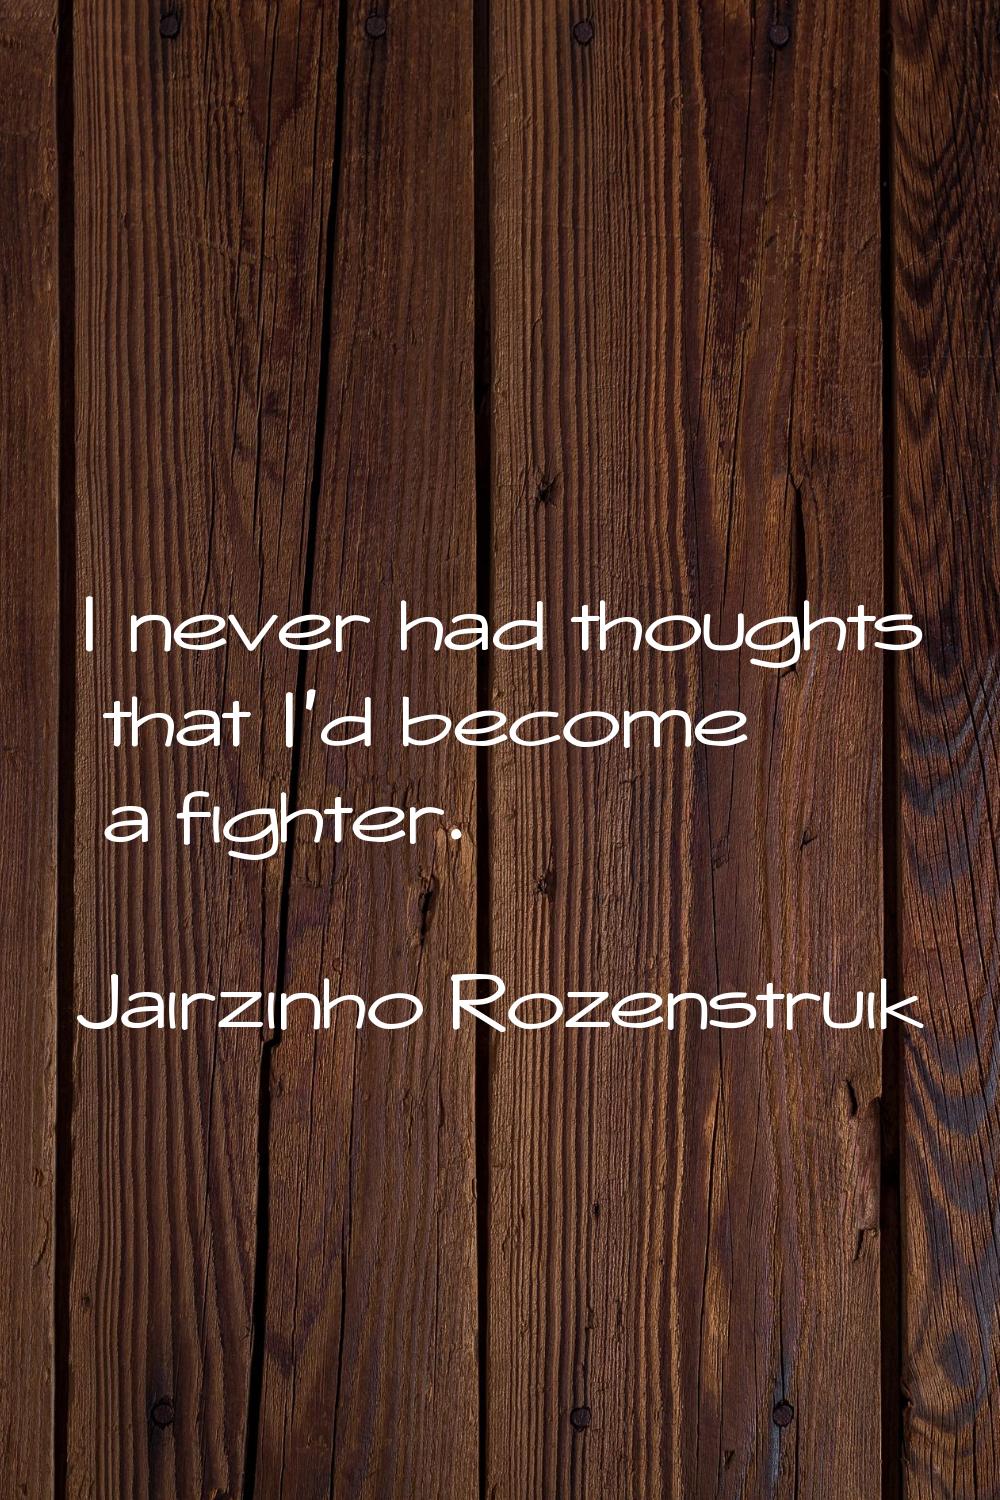 I never had thoughts that I'd become a fighter.